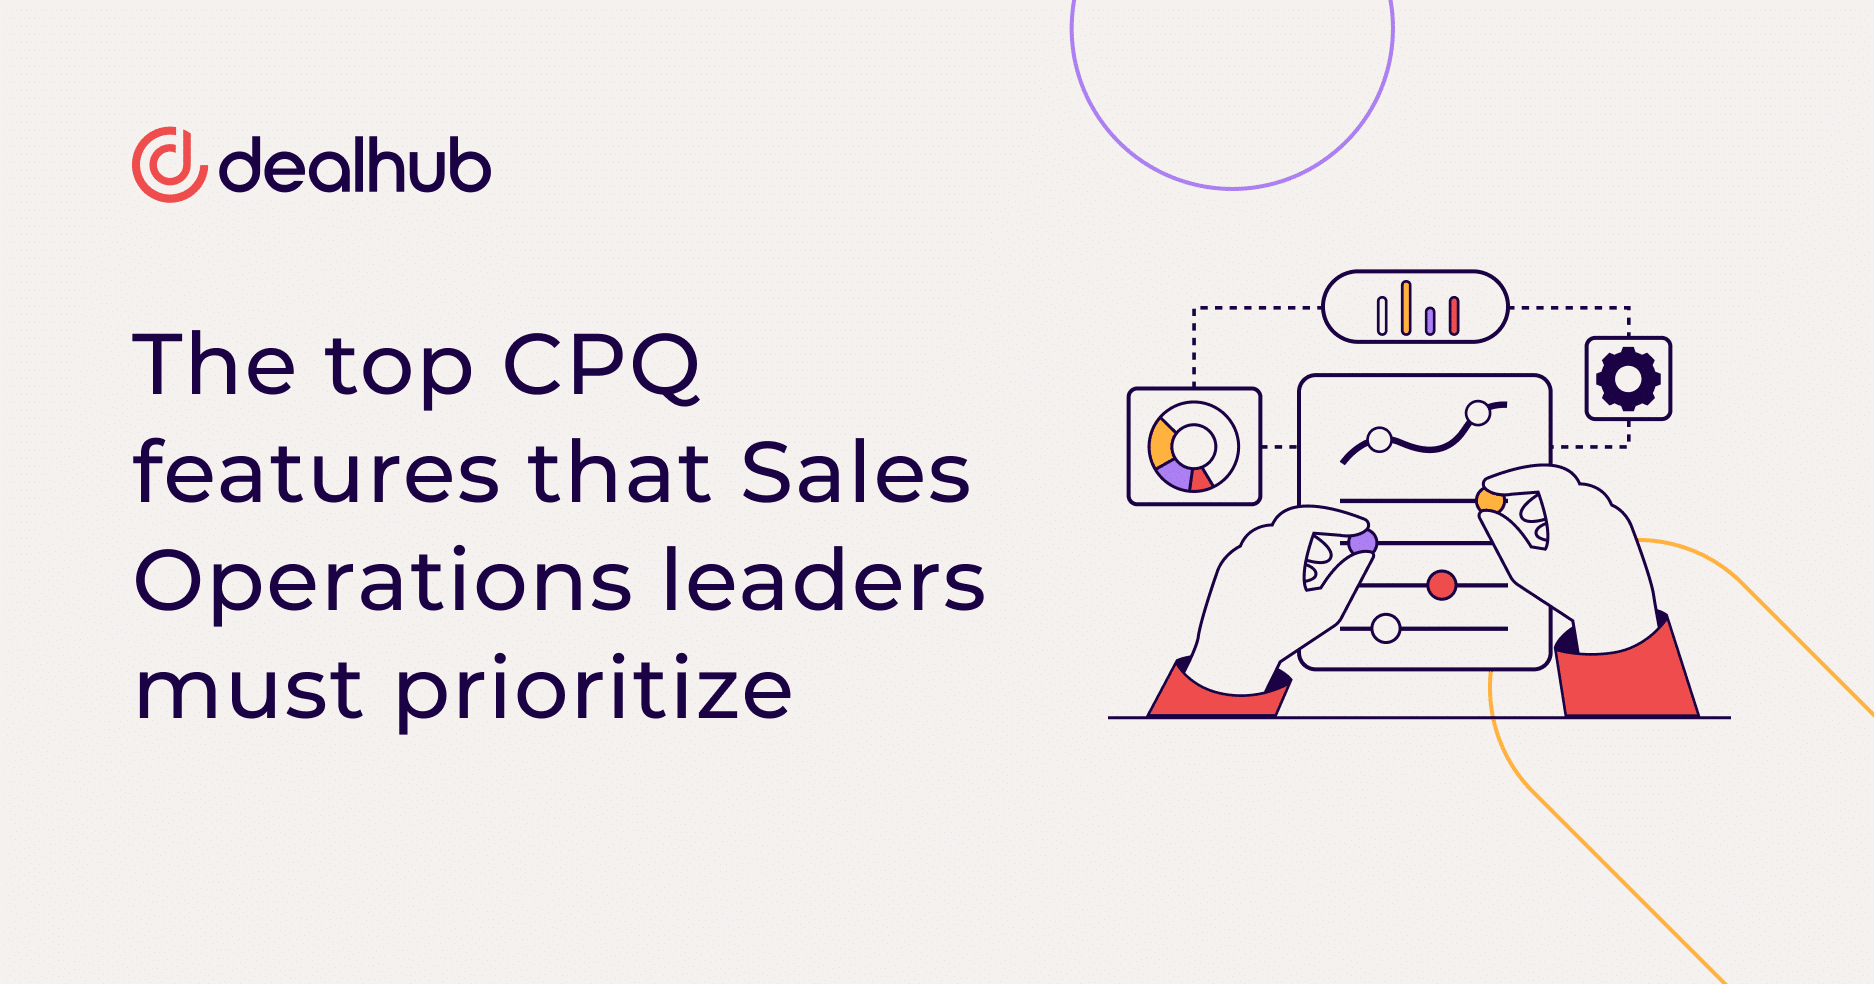 The top CPQ features that Sales Operations leaders must prioritize